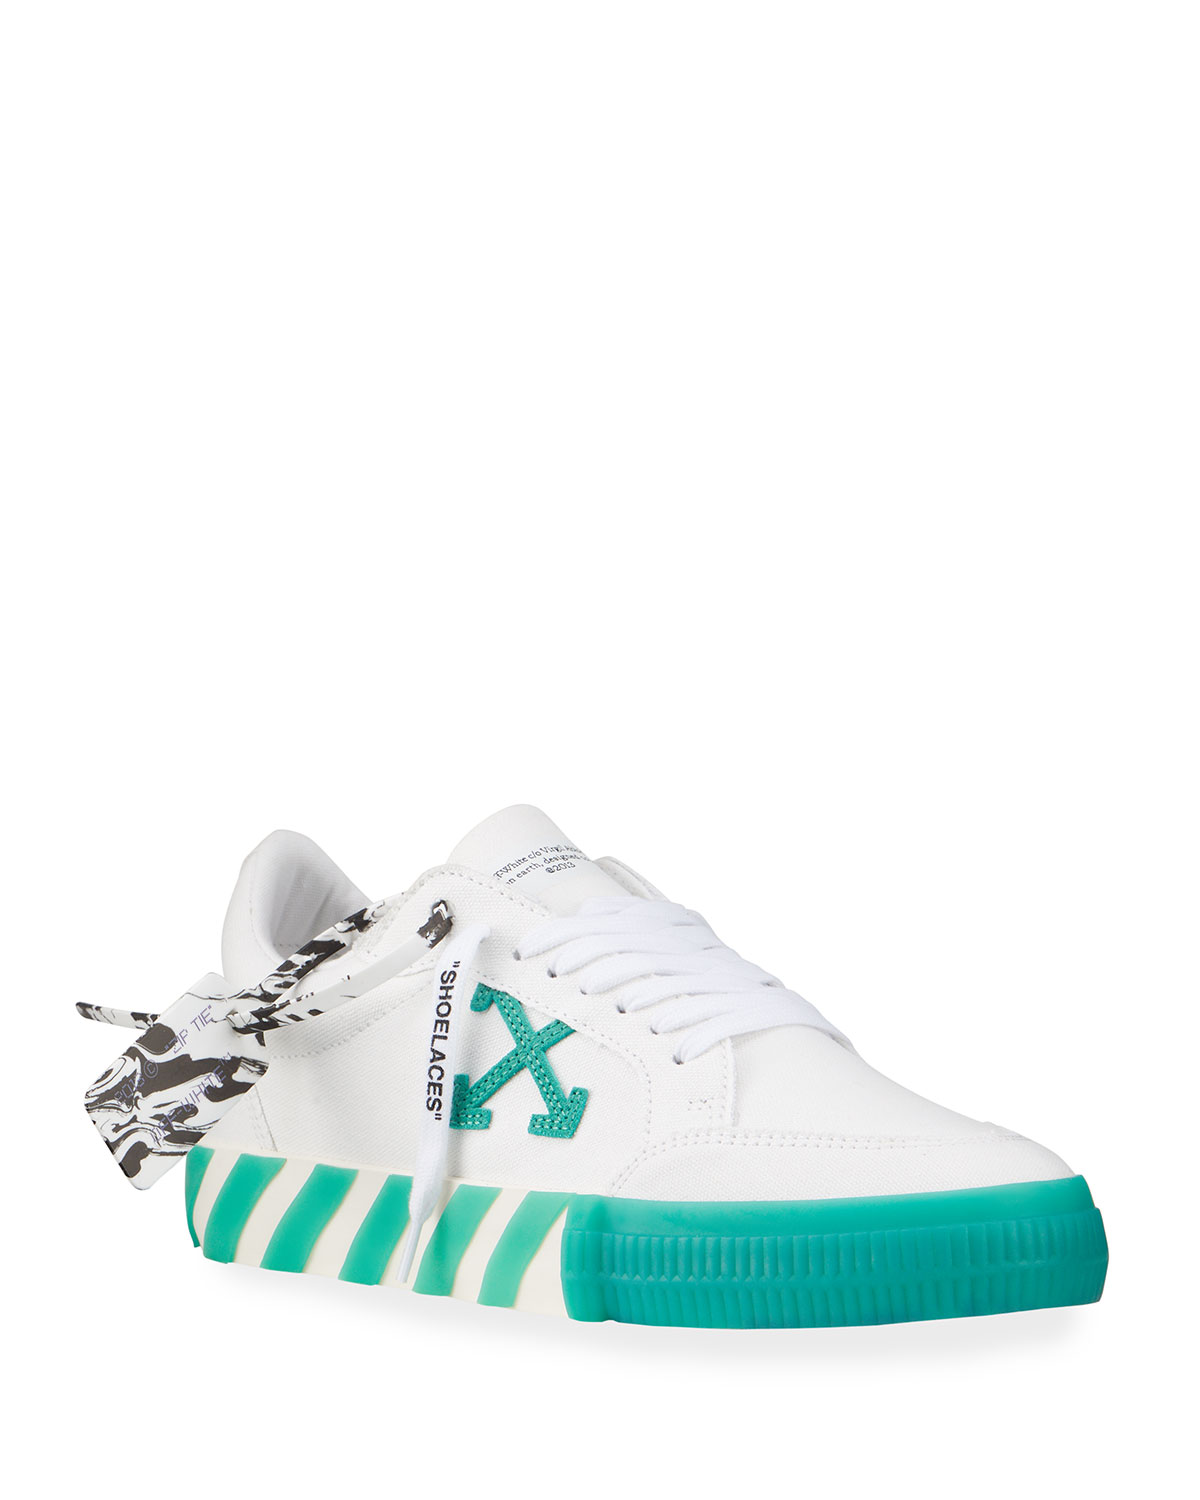 Off-White Men’s Arrow Canvas Vulcanized Low-Top Sneakers – ALL SHOE STYLES